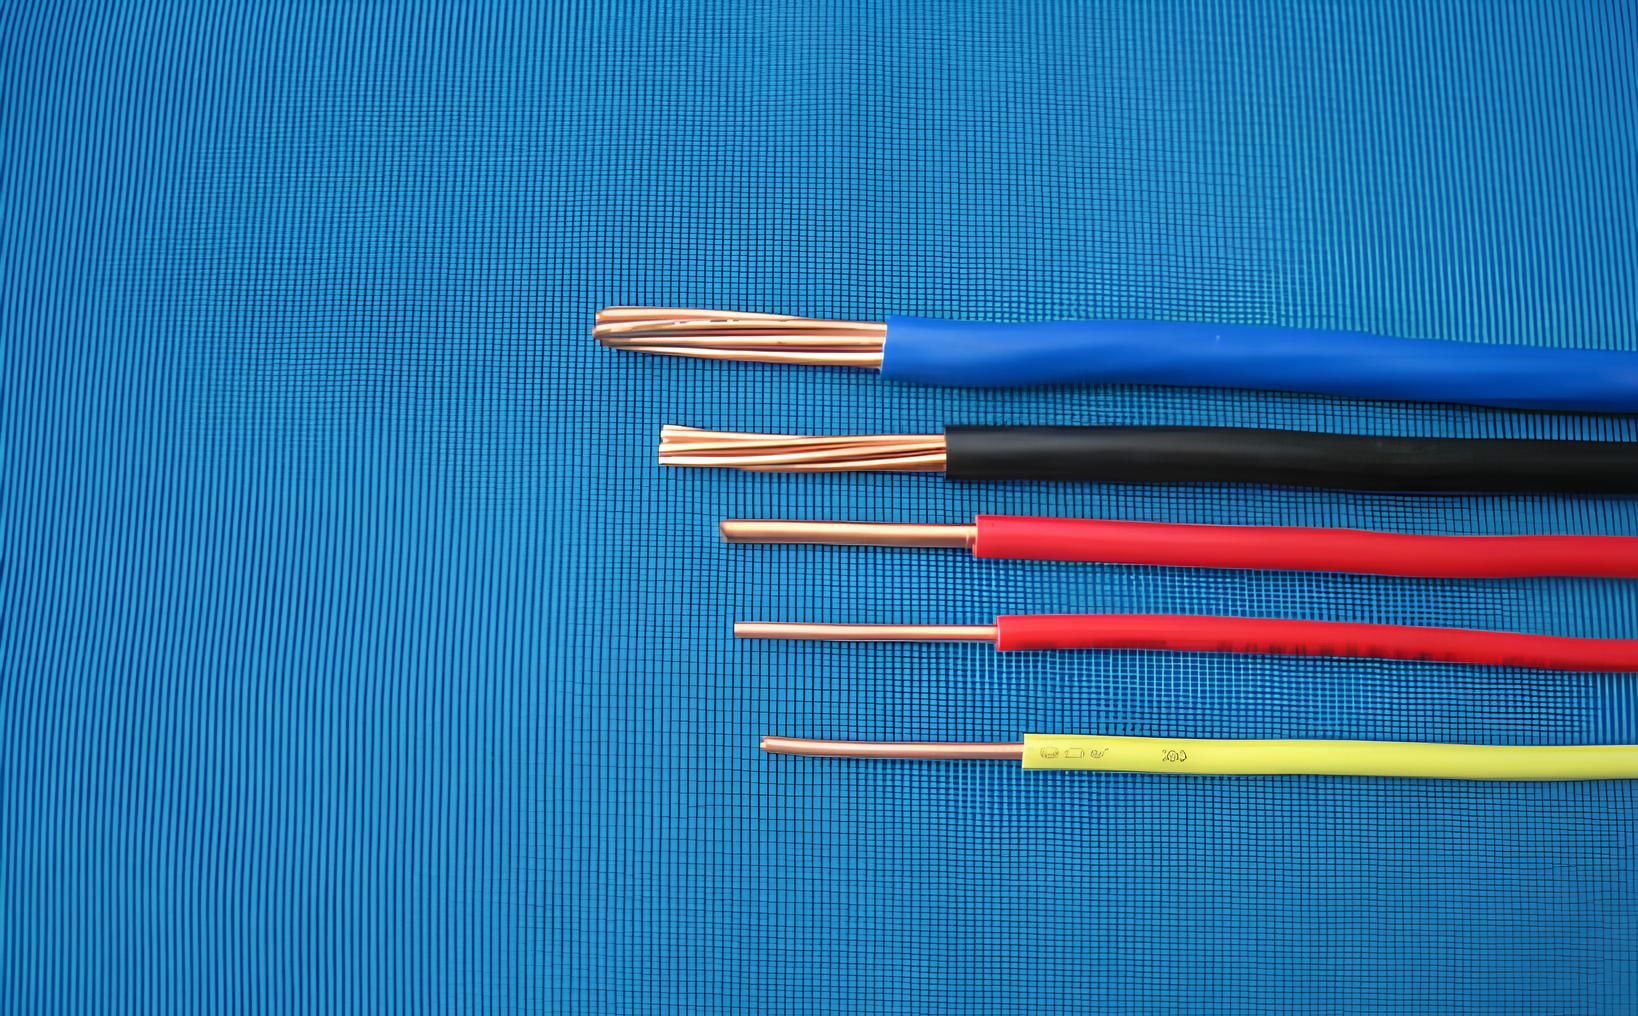 What auxiliary materials are needed for wire installation